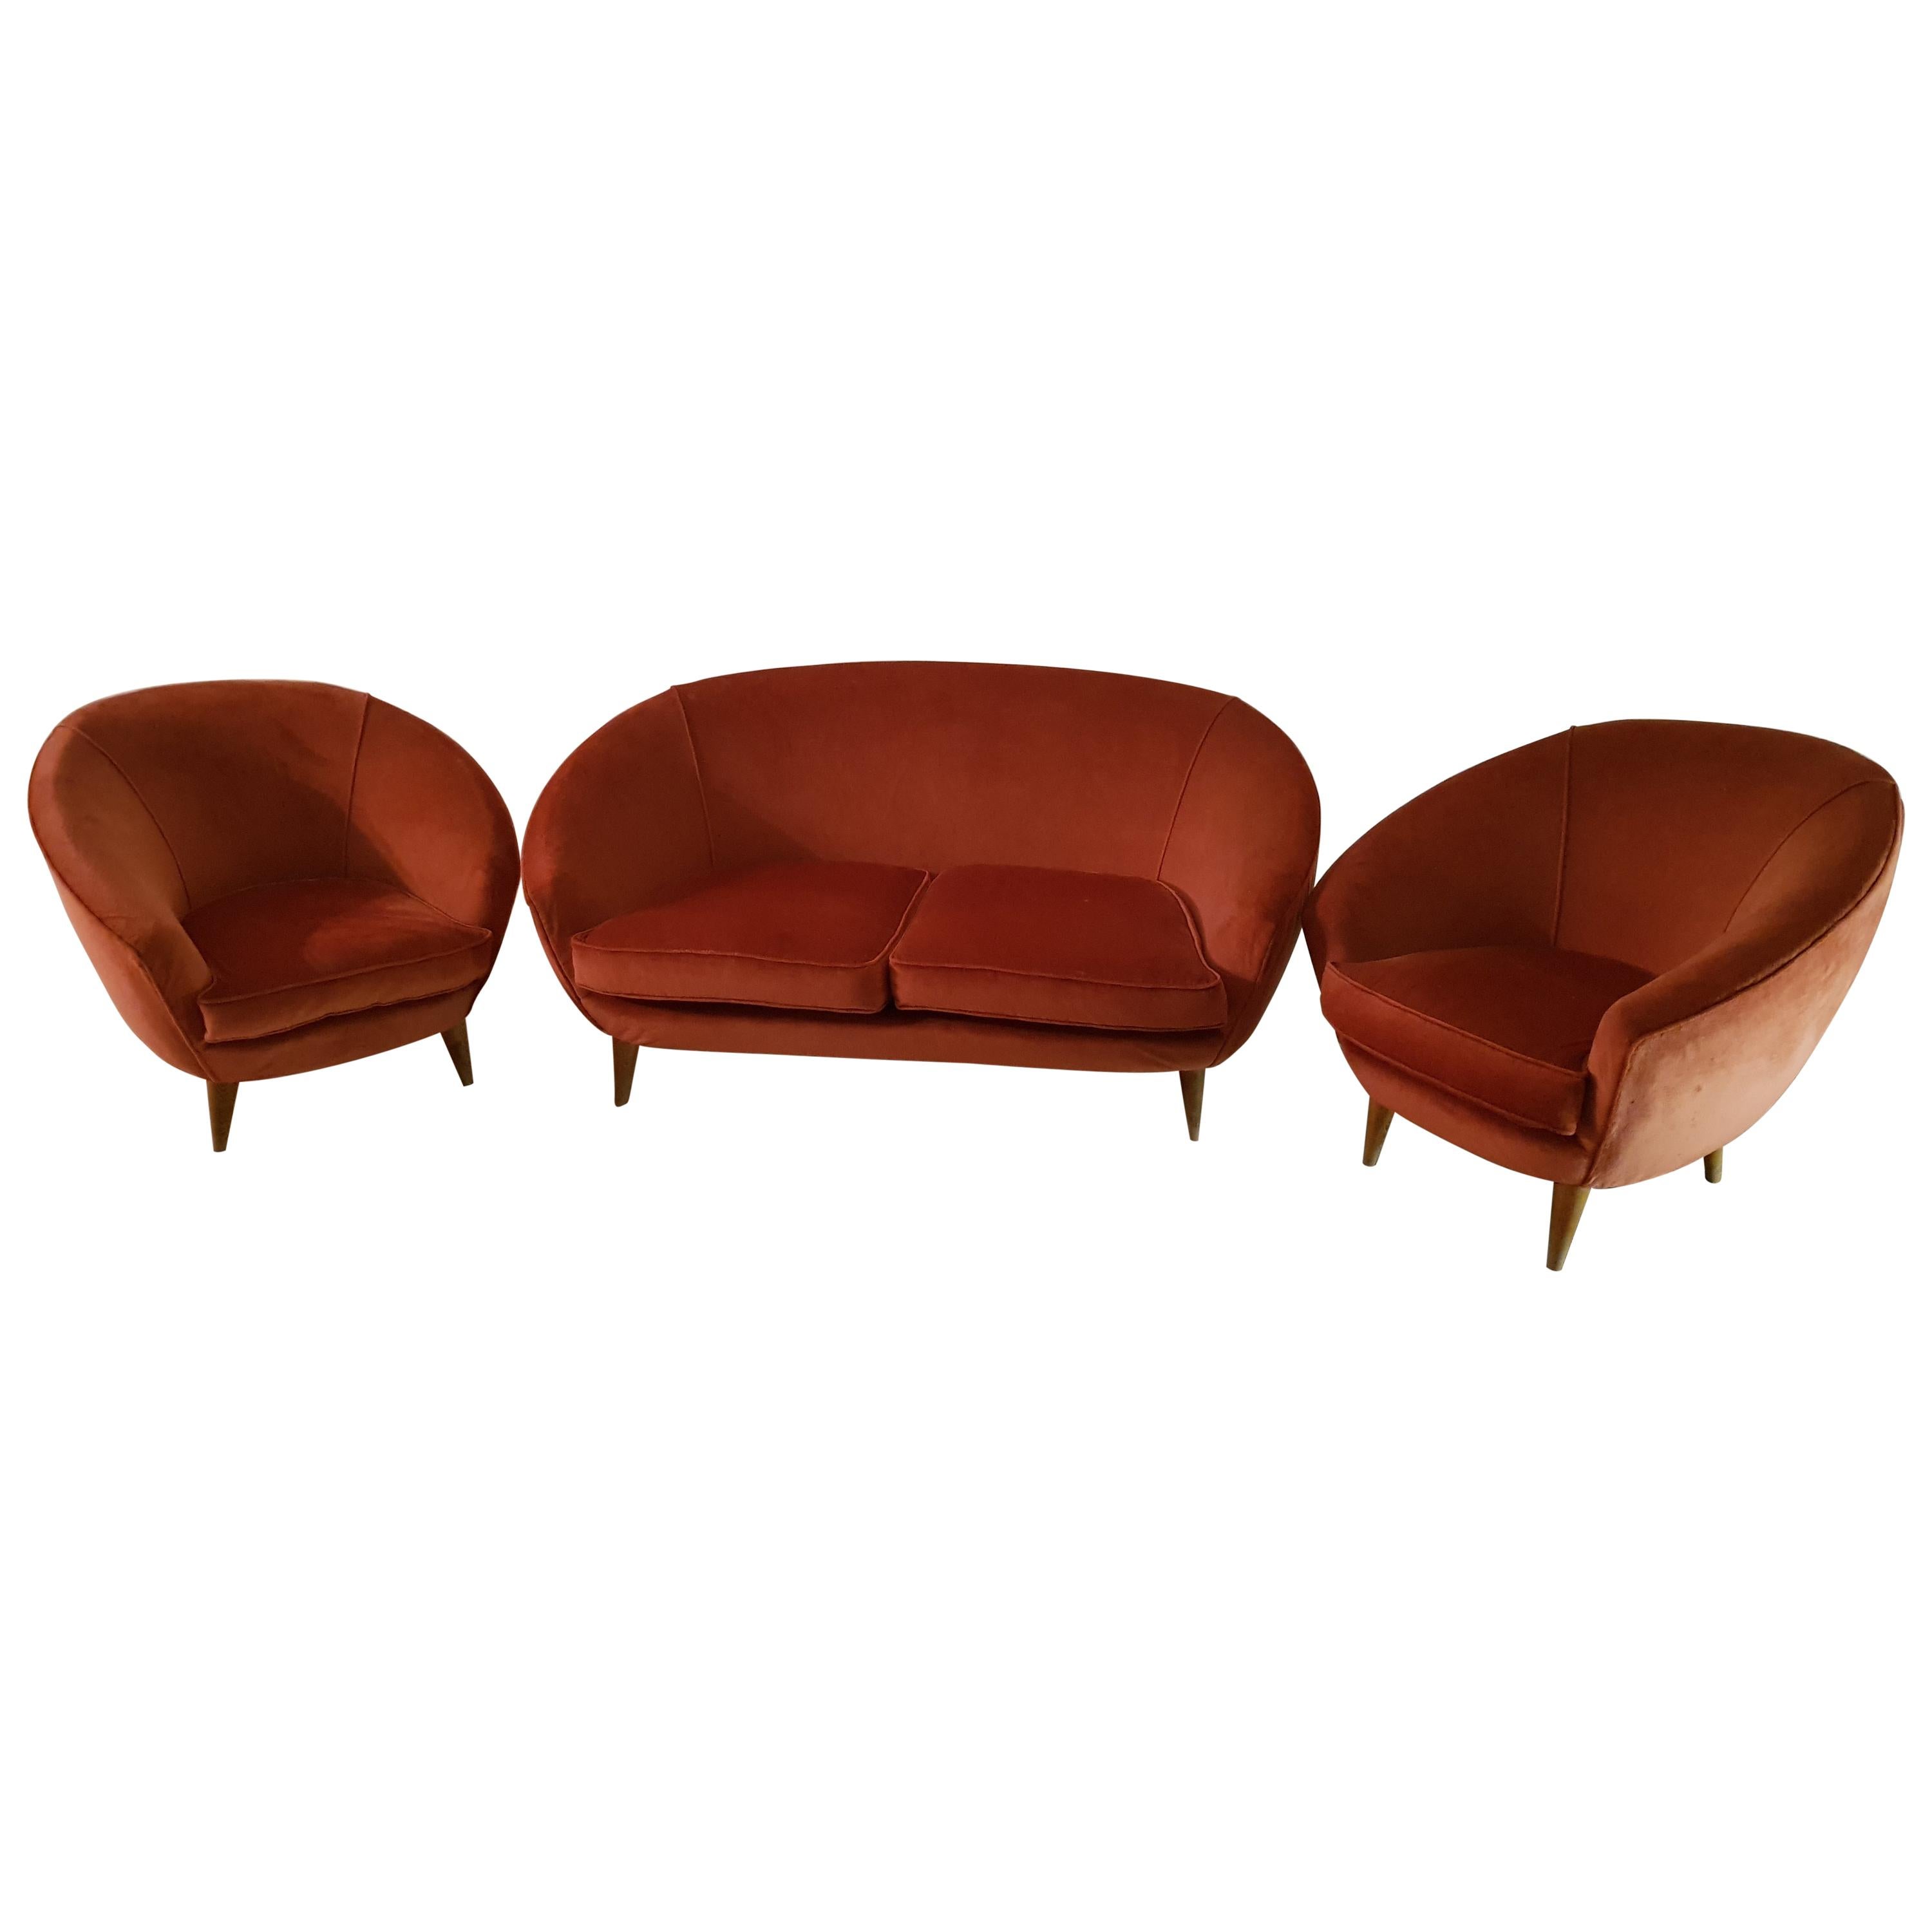 Midcentury Sofà In the Style of Giò Ponti, Coral Velvet Armchairs 1950 set of 3 